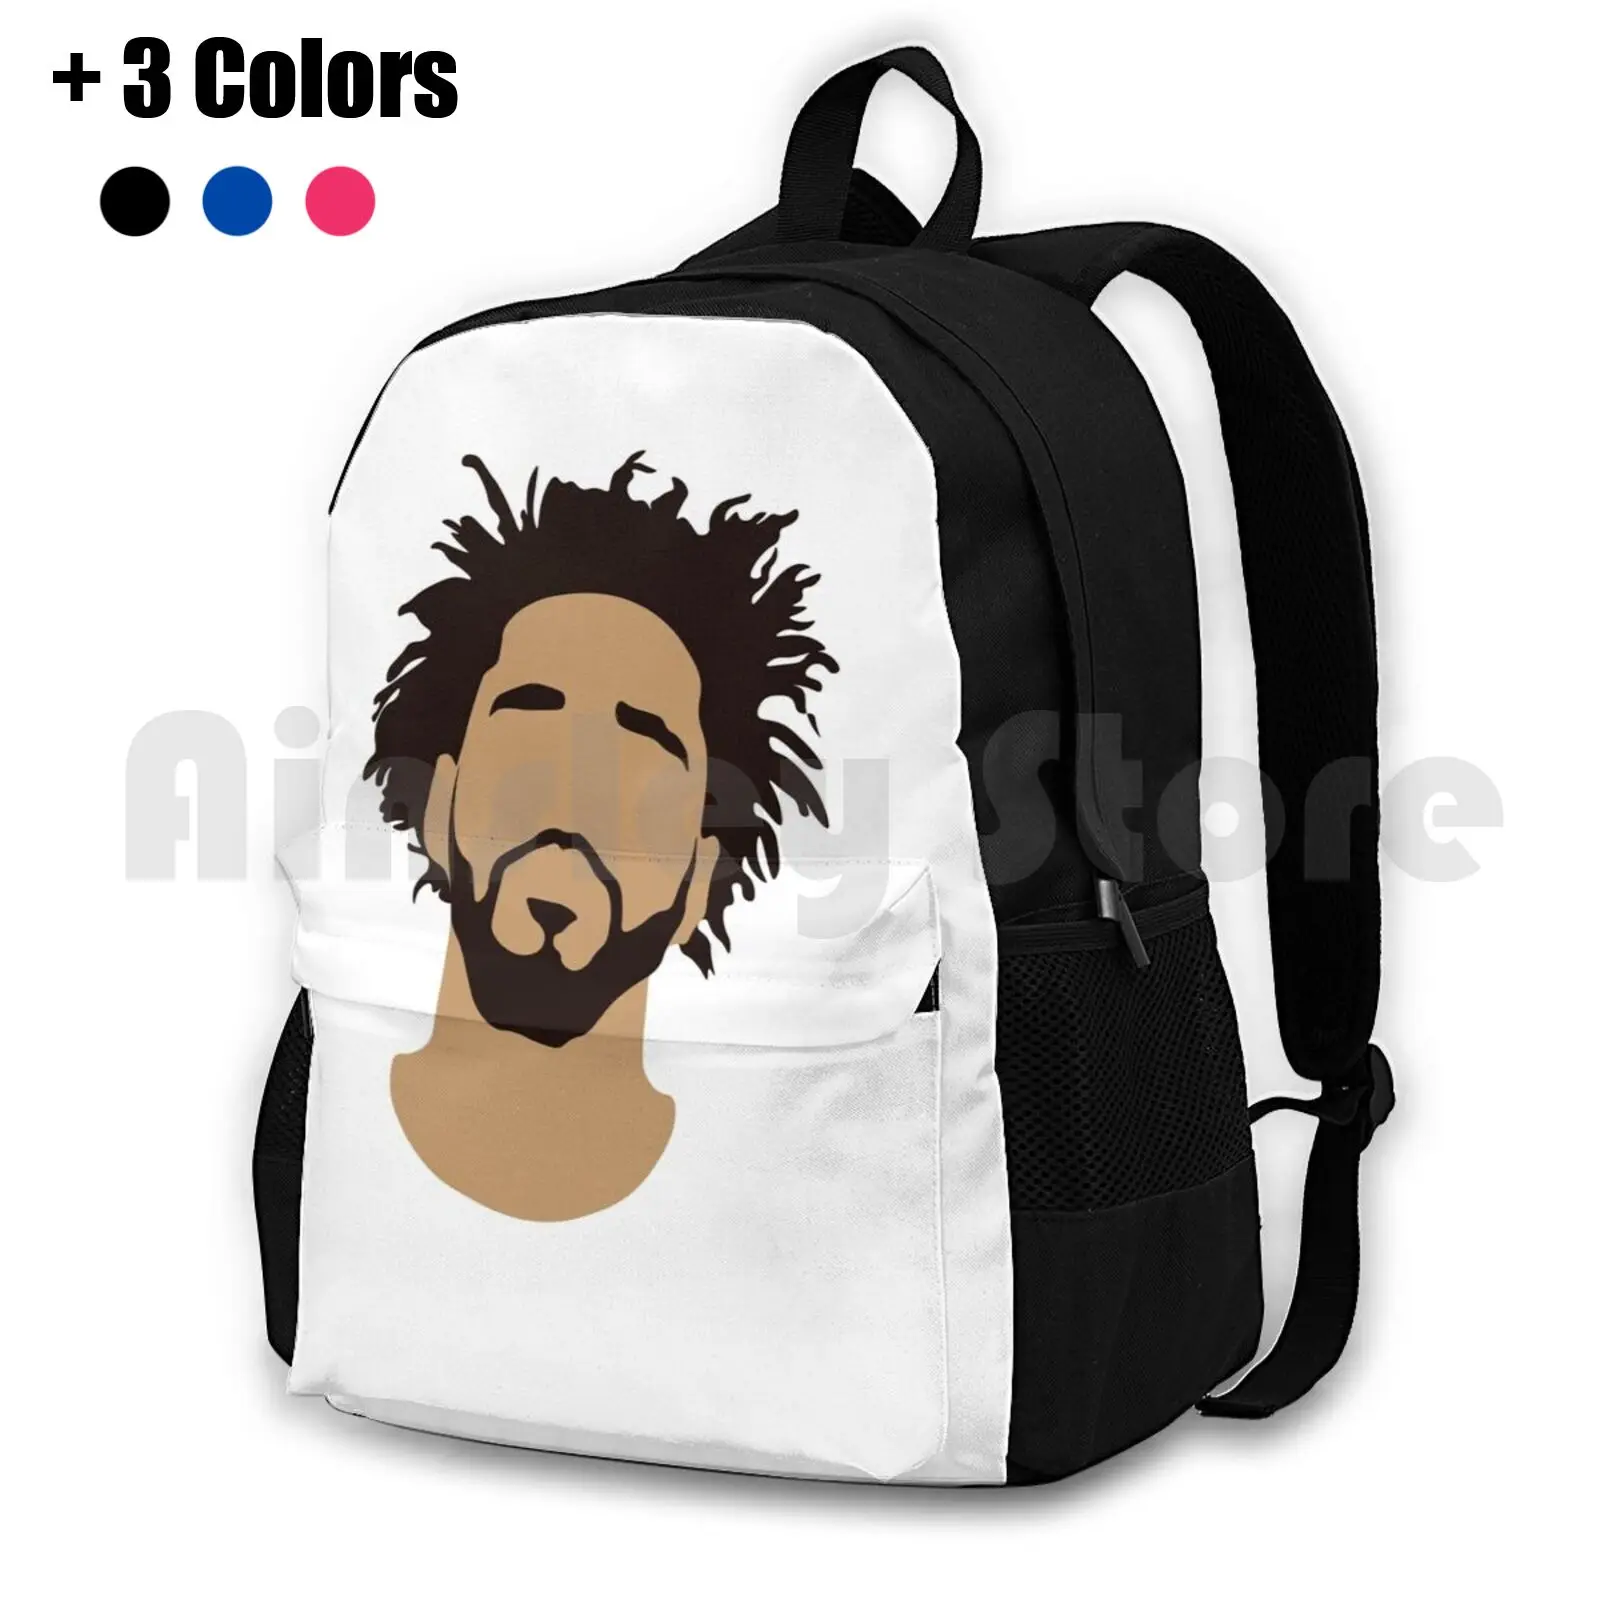 

J Cole Silhouette Outdoor Hiking Backpack Waterproof Camping Travel Jermaine Cole J Cole Rap Hip Hop Music Forrest Hills Drive